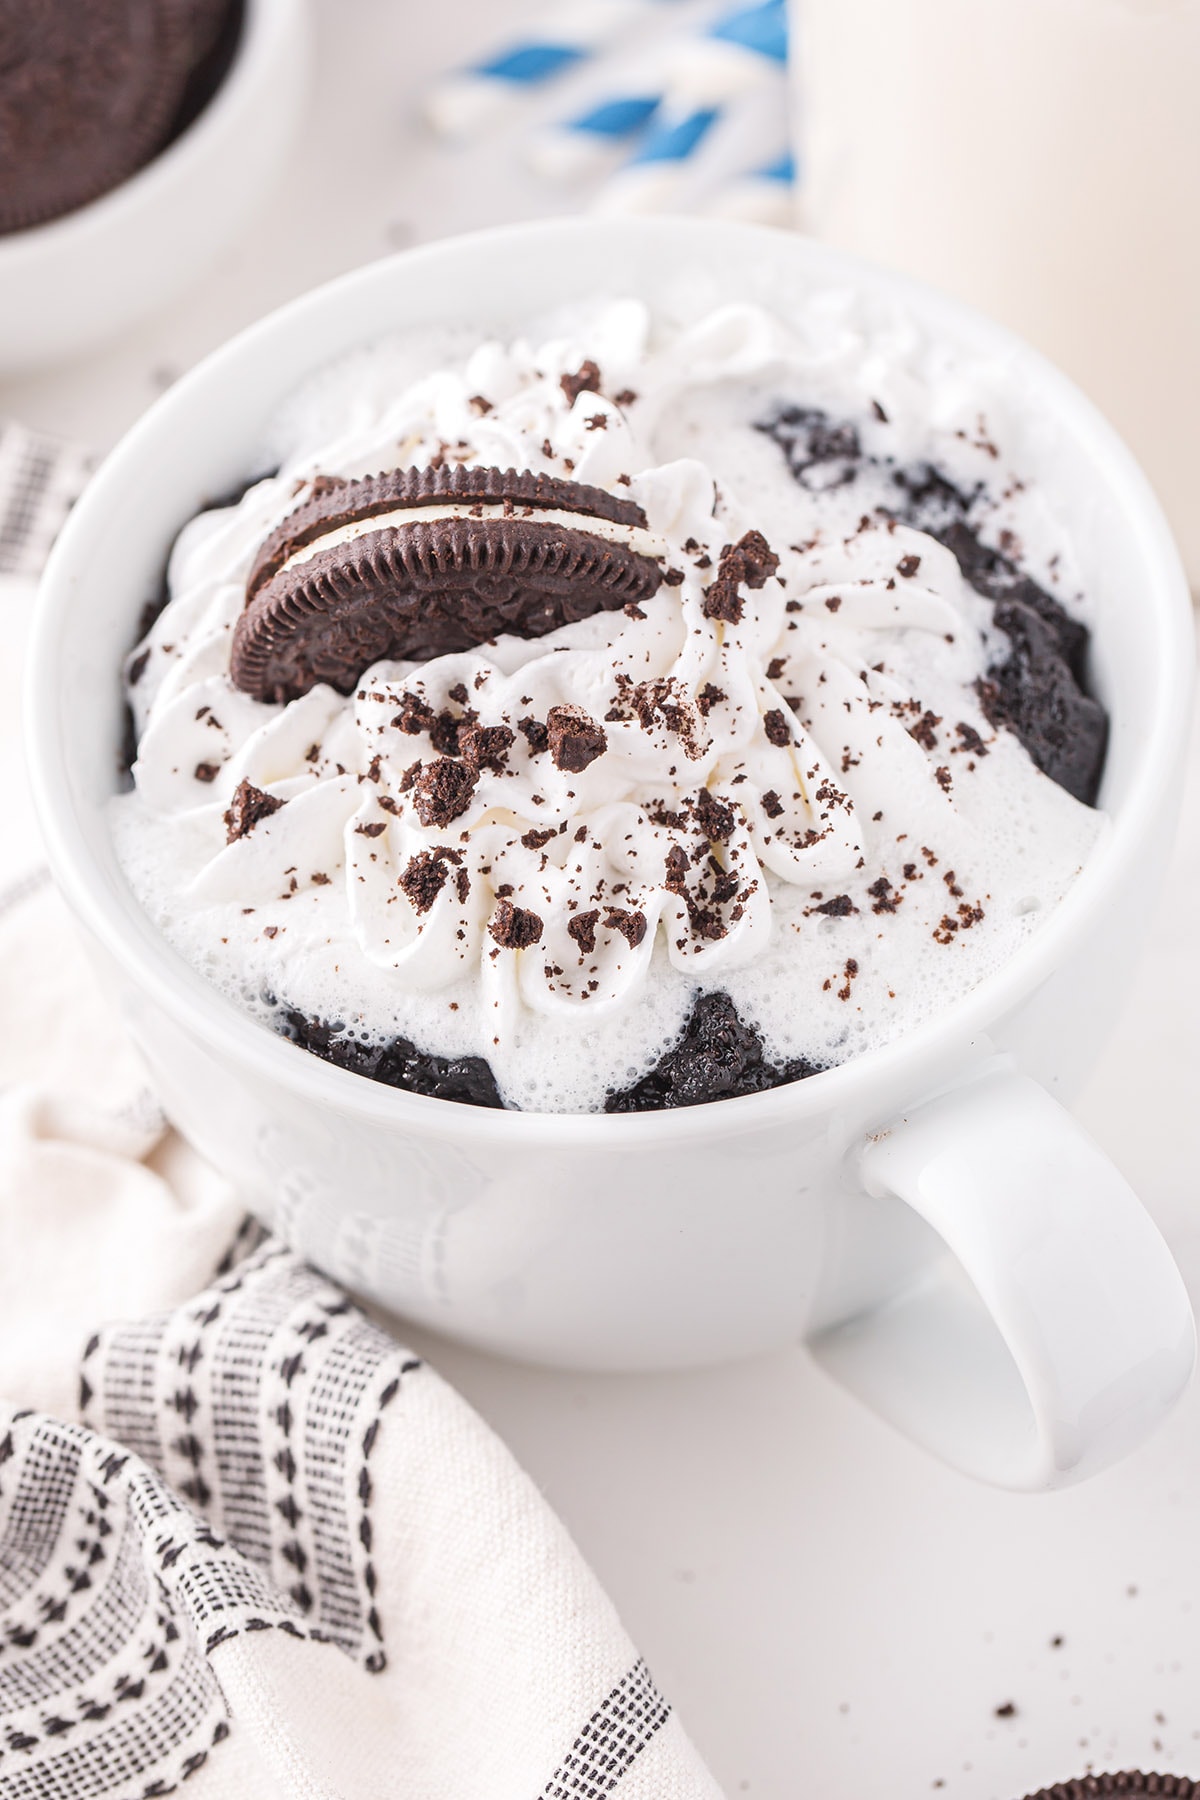 A cup of coffee, with Oreo and Cake